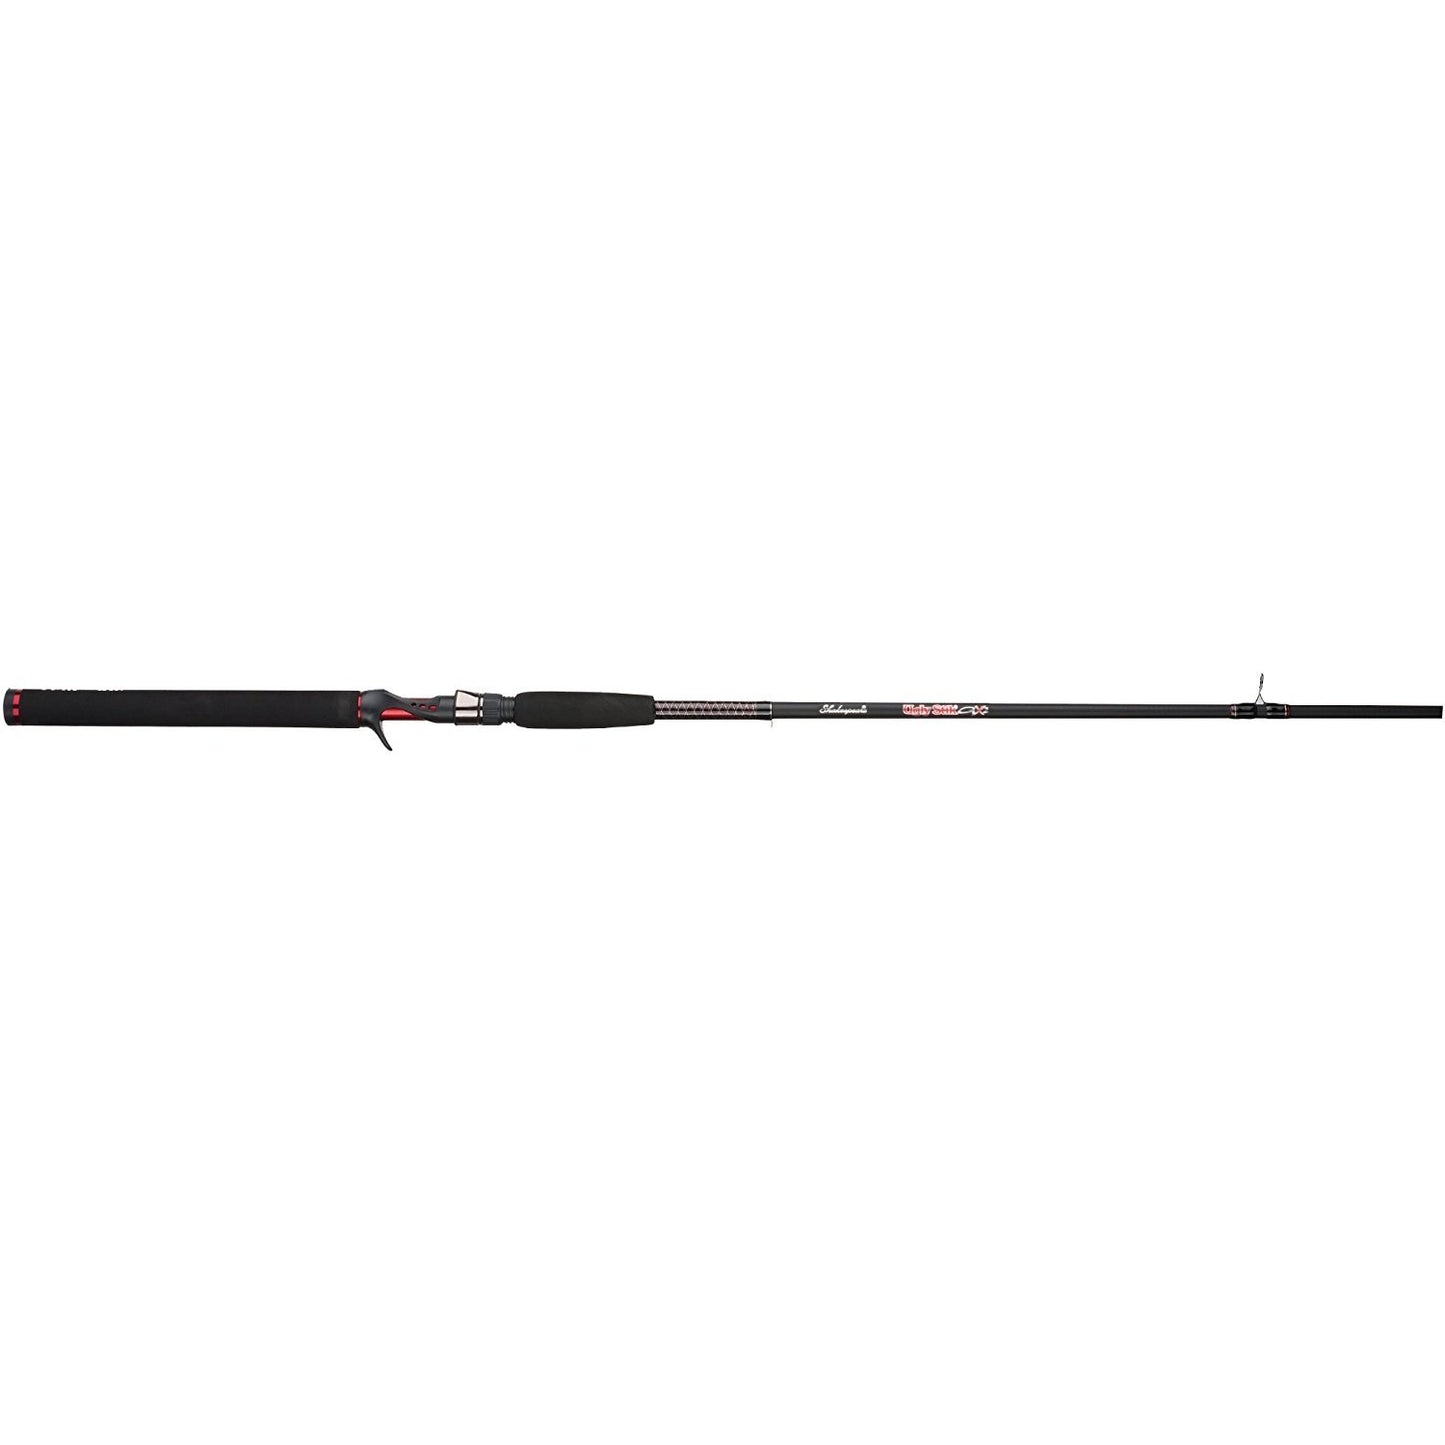 Ugly Stik 6’6” GX2 Casting Rod, One Piece Casting Rod, 8-20lb Line Rating, Medium Rod Power, Moderate Fast Action, 1/4-5/8 oz. Lure Rating